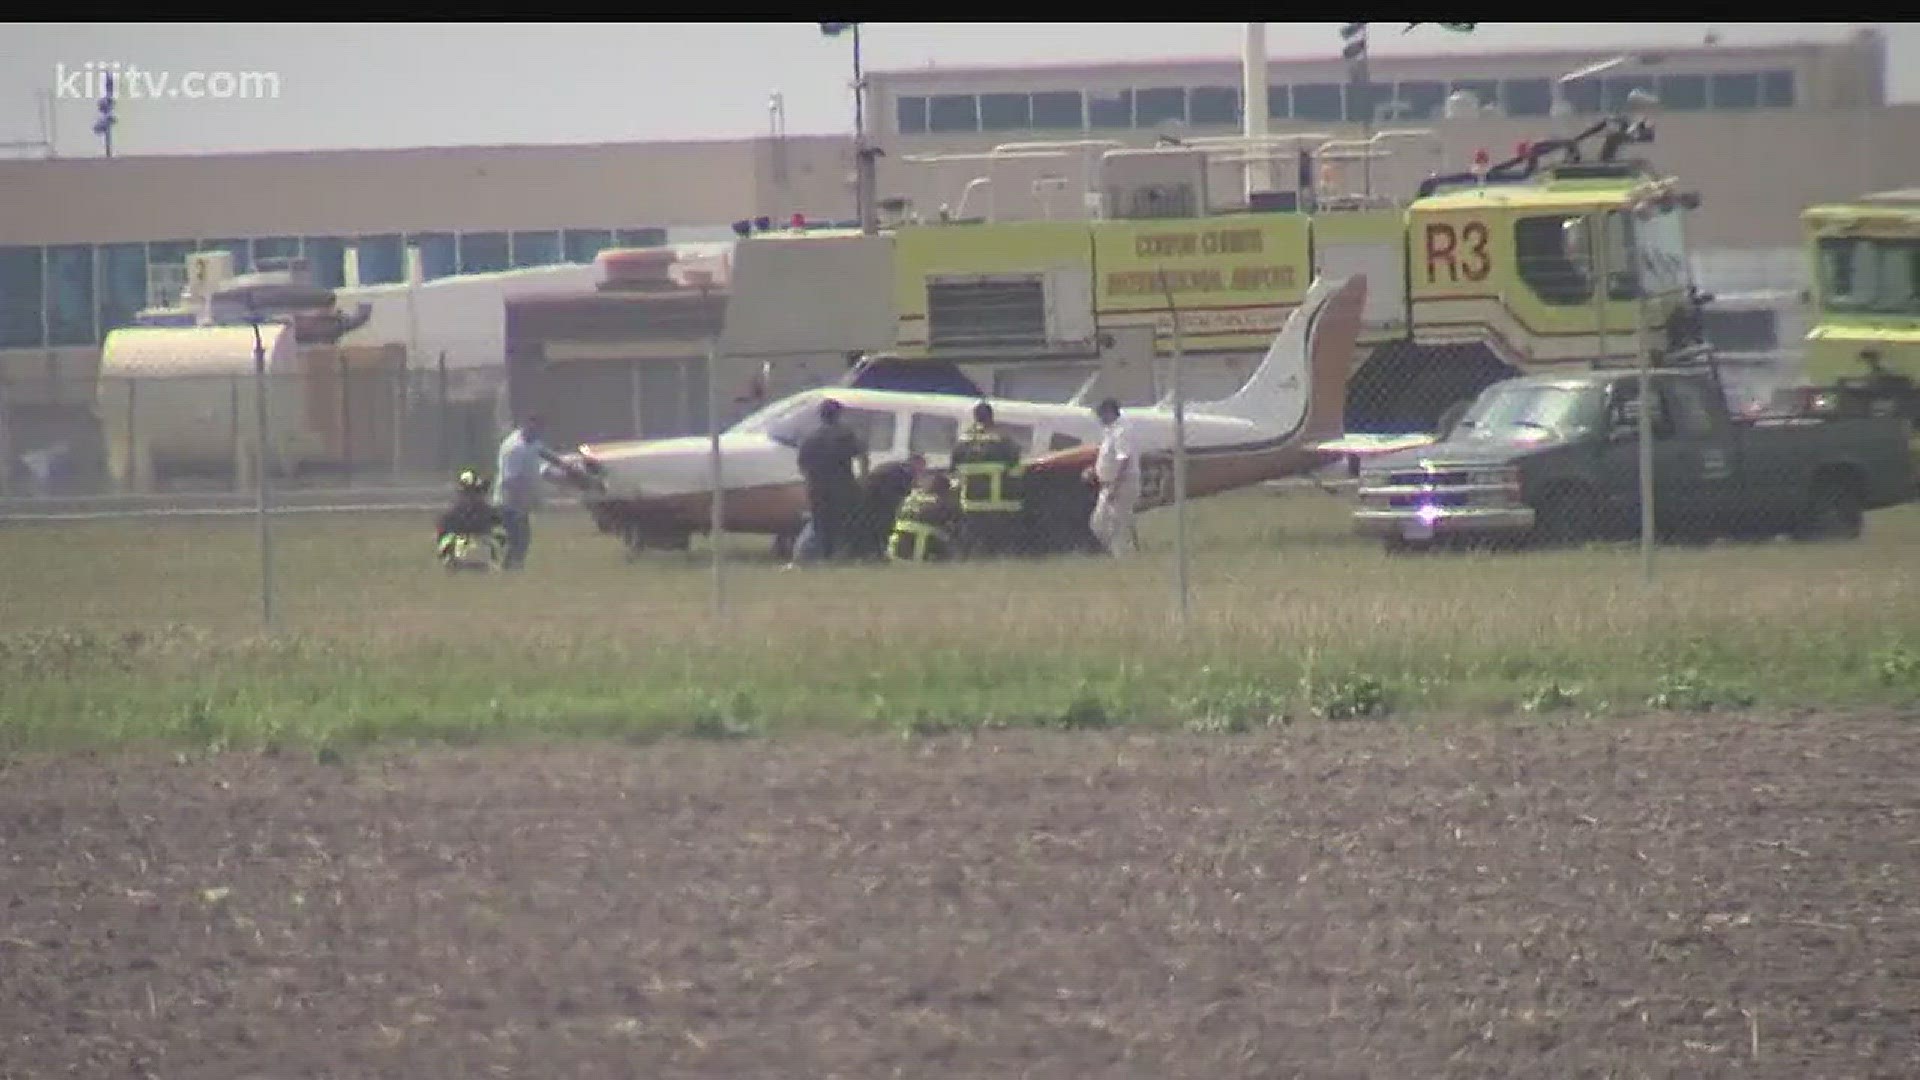 No injuries were reported and airport management said emergency crews had plenty of time to prepare for the landing.